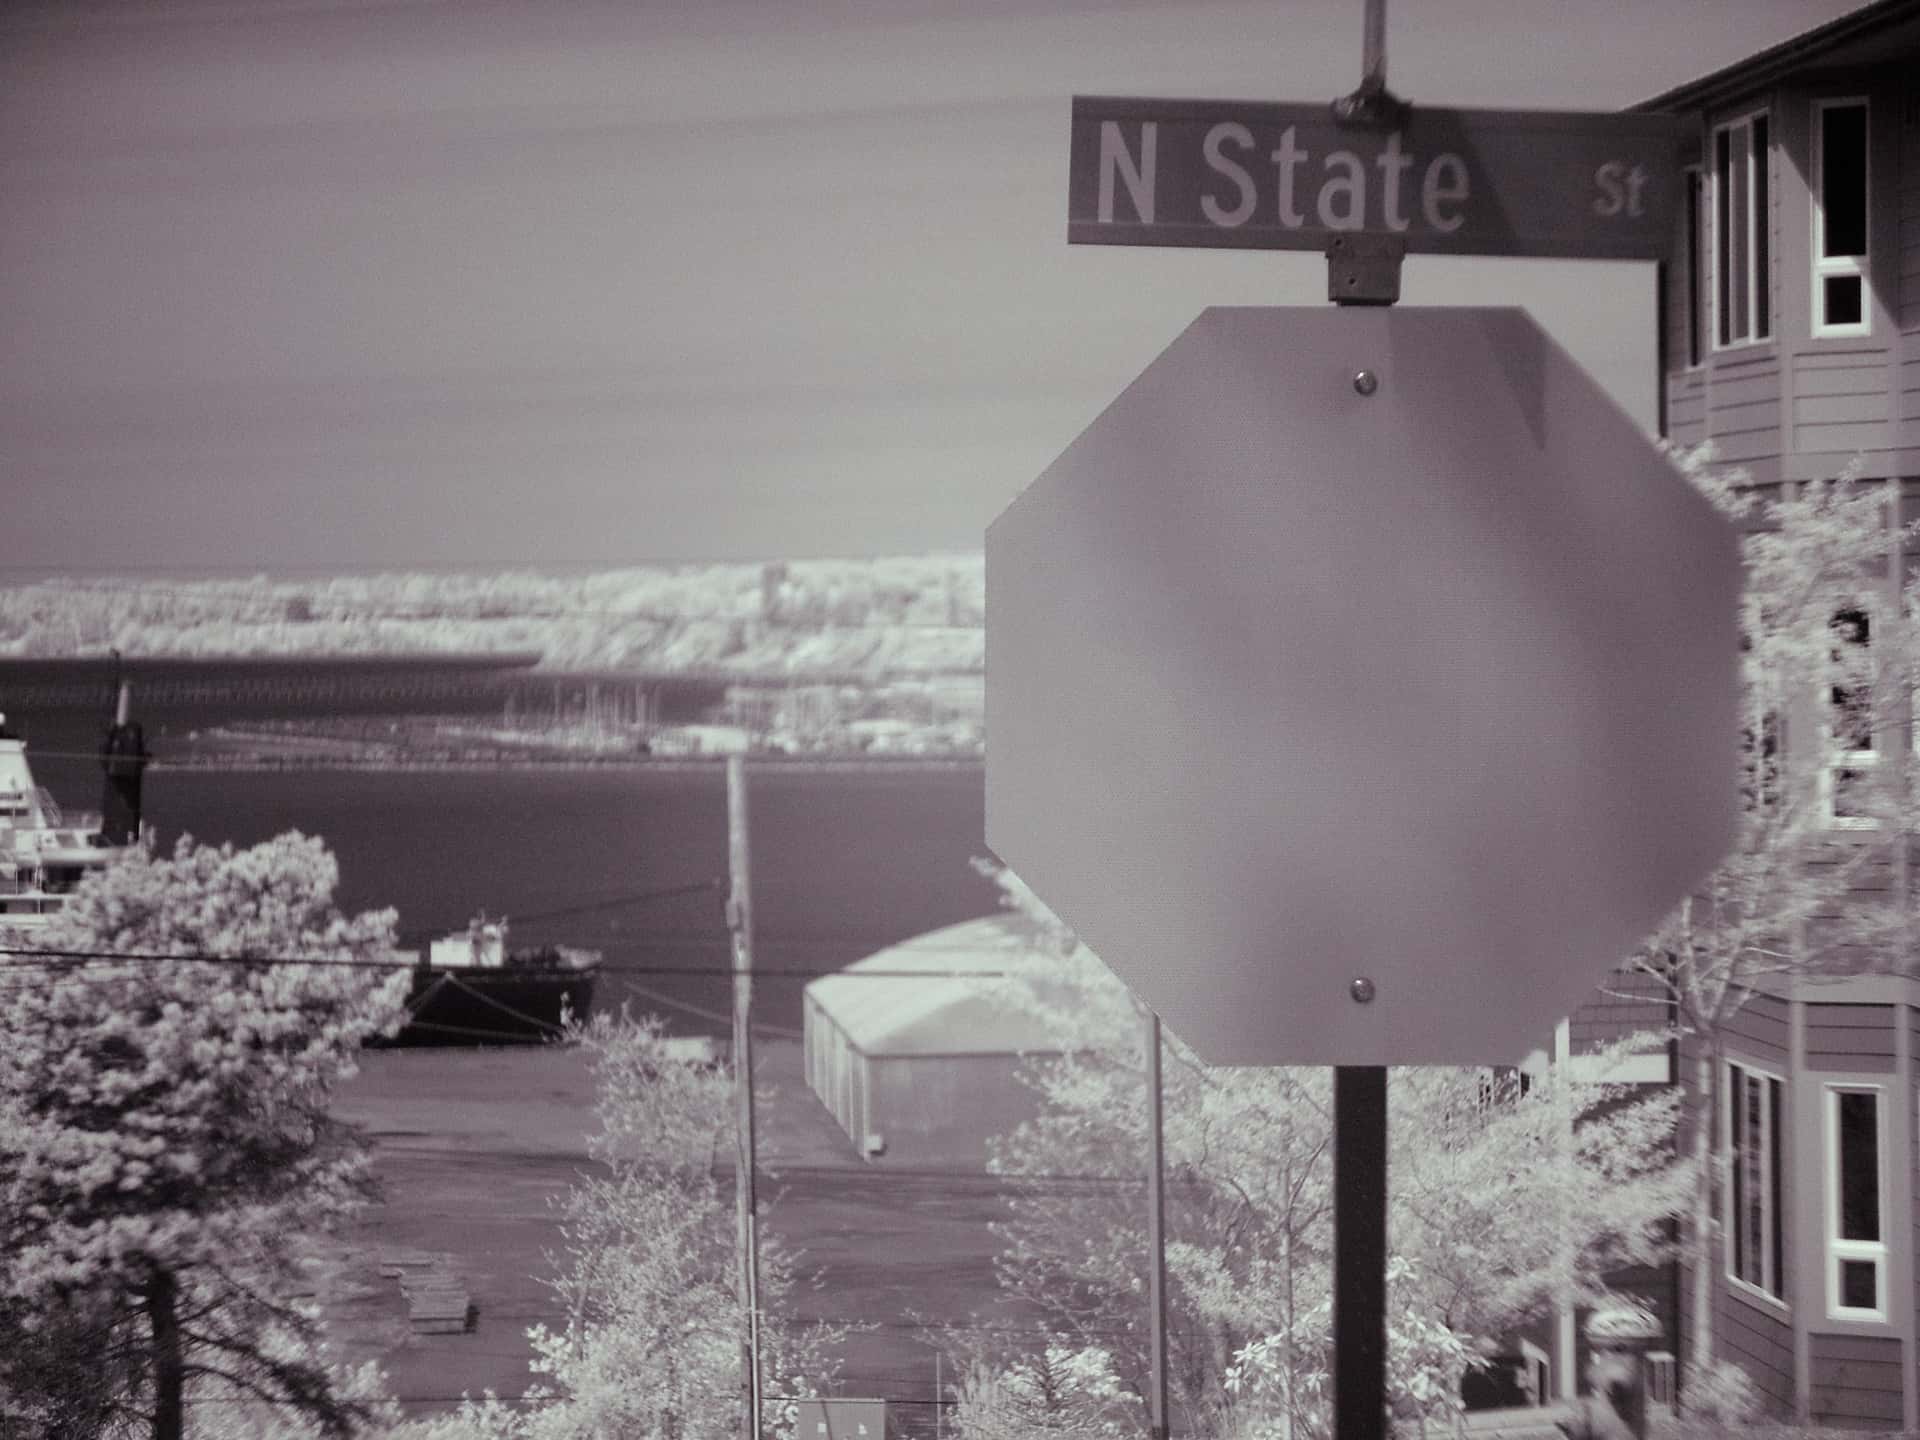 apparently blank stop sign in an infrared photograph